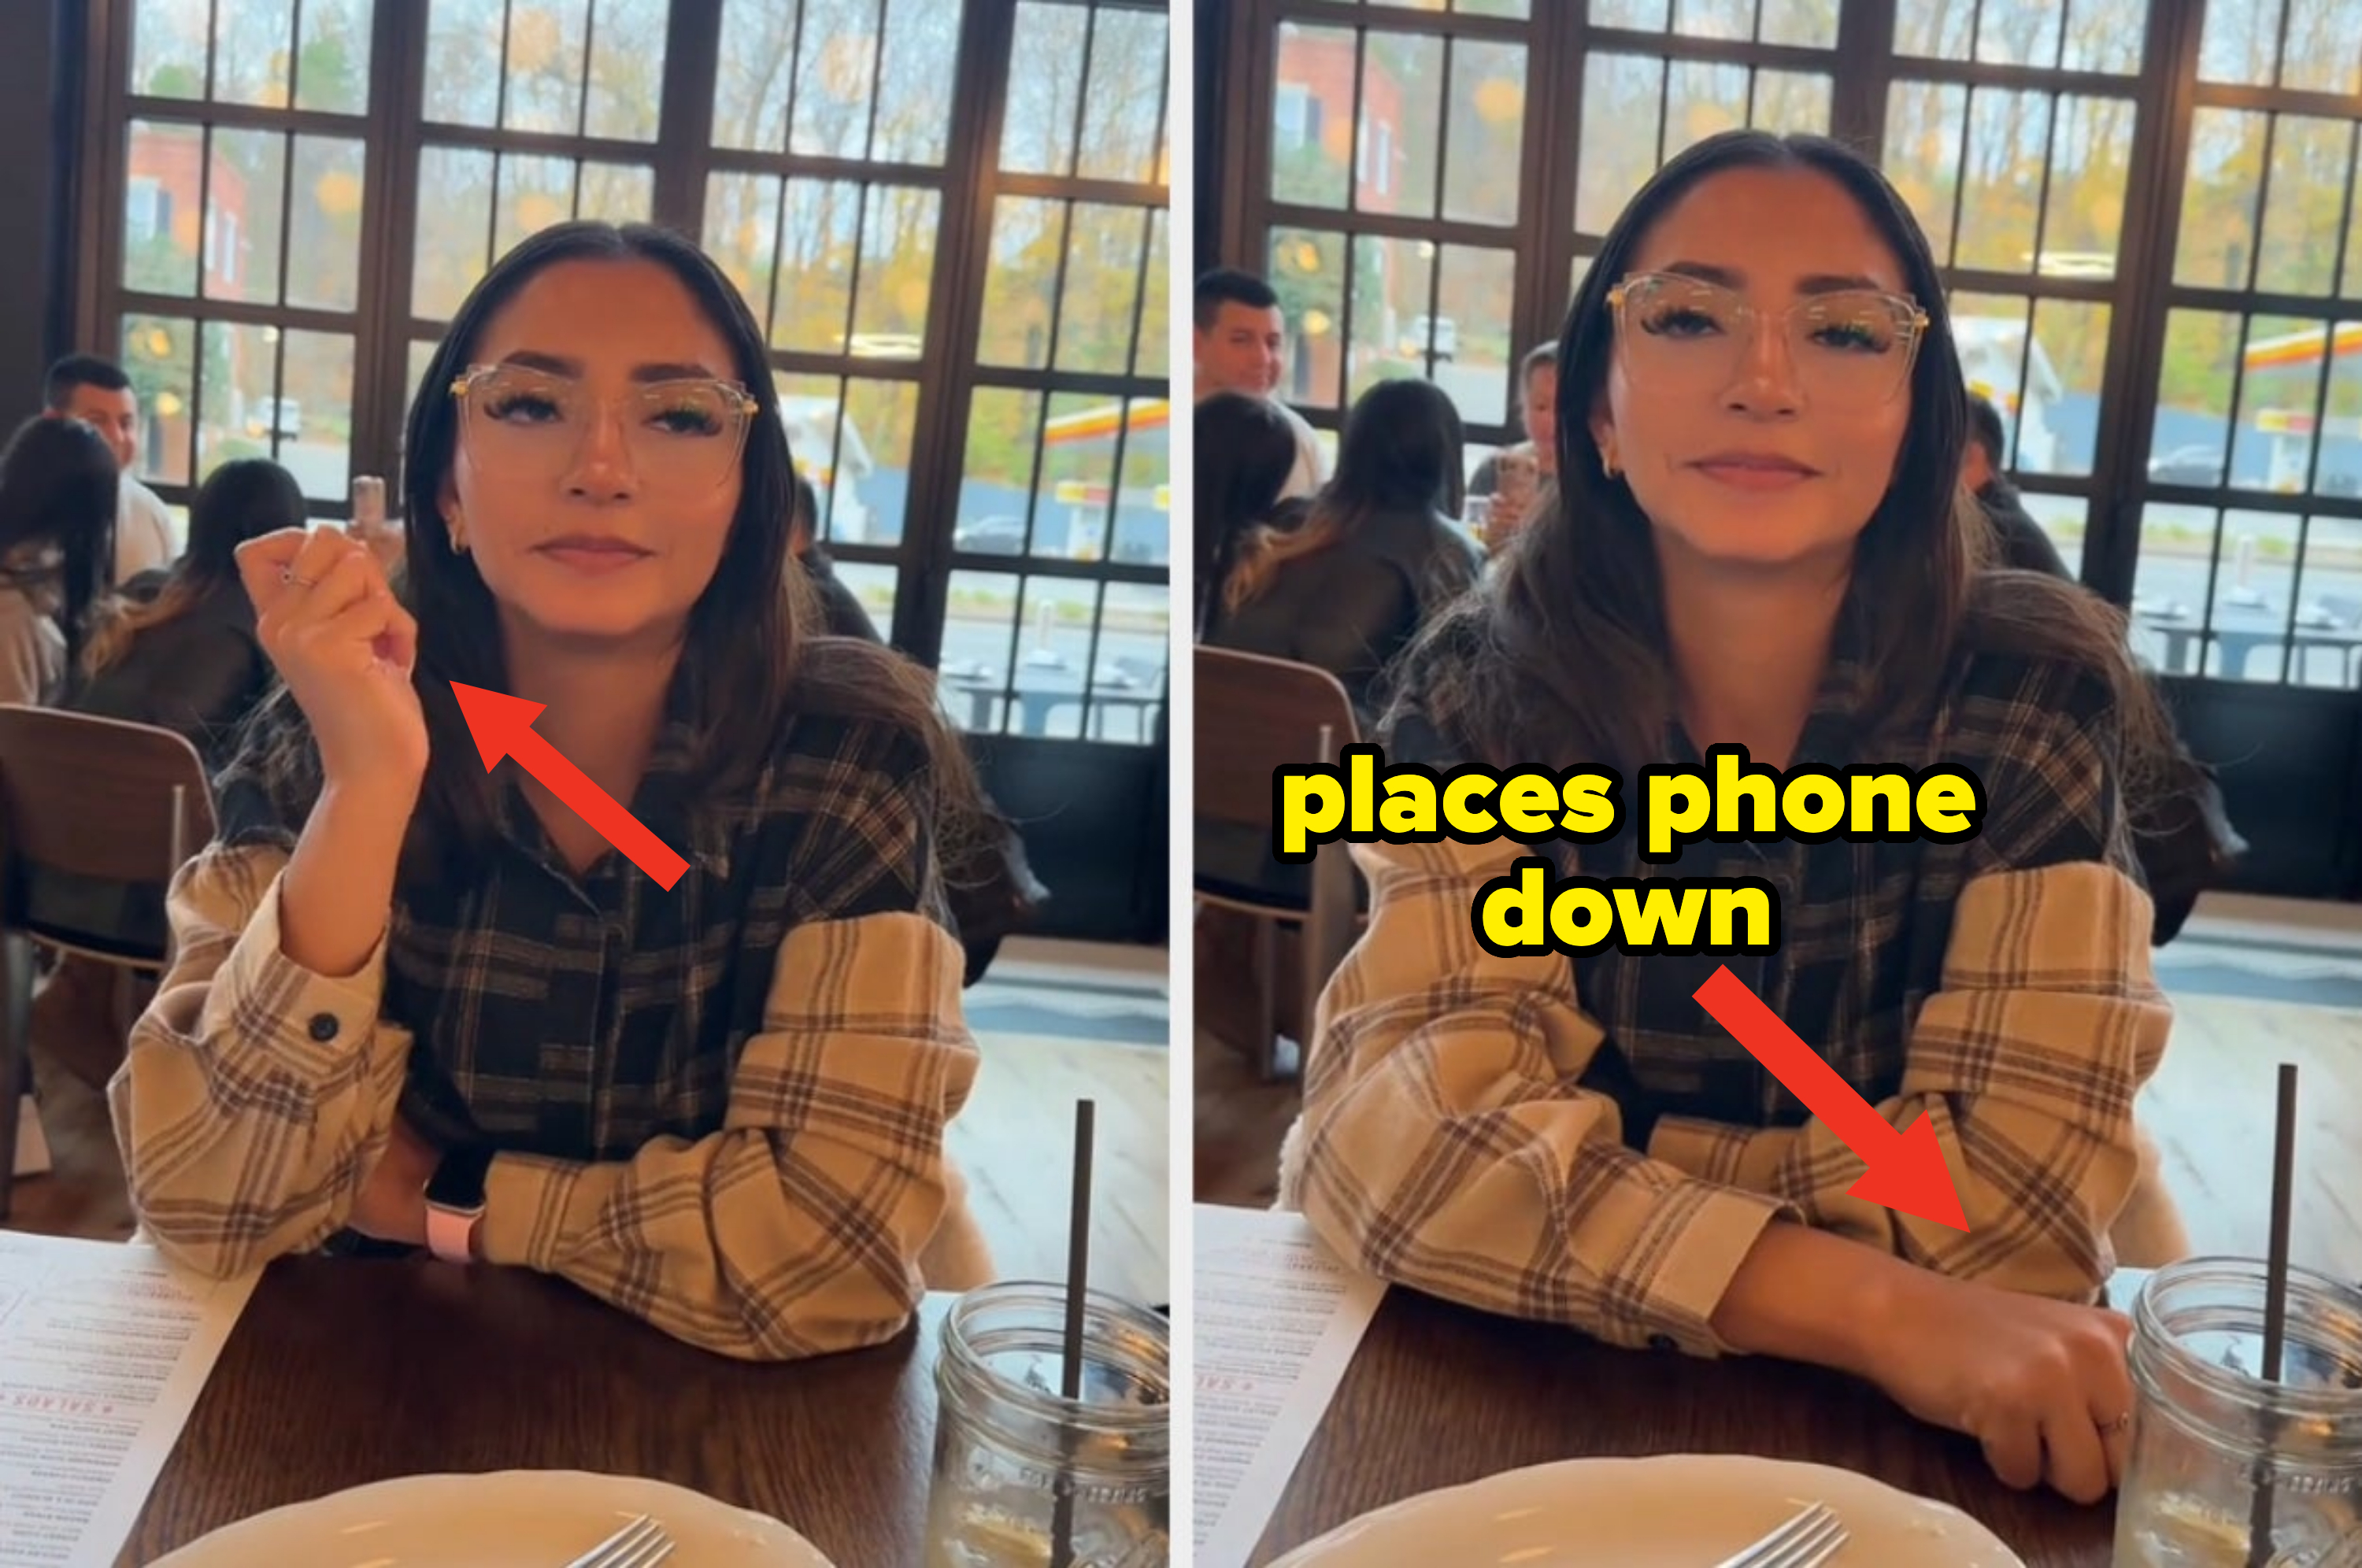 woman hanging up phone by placing an imaginary phone down